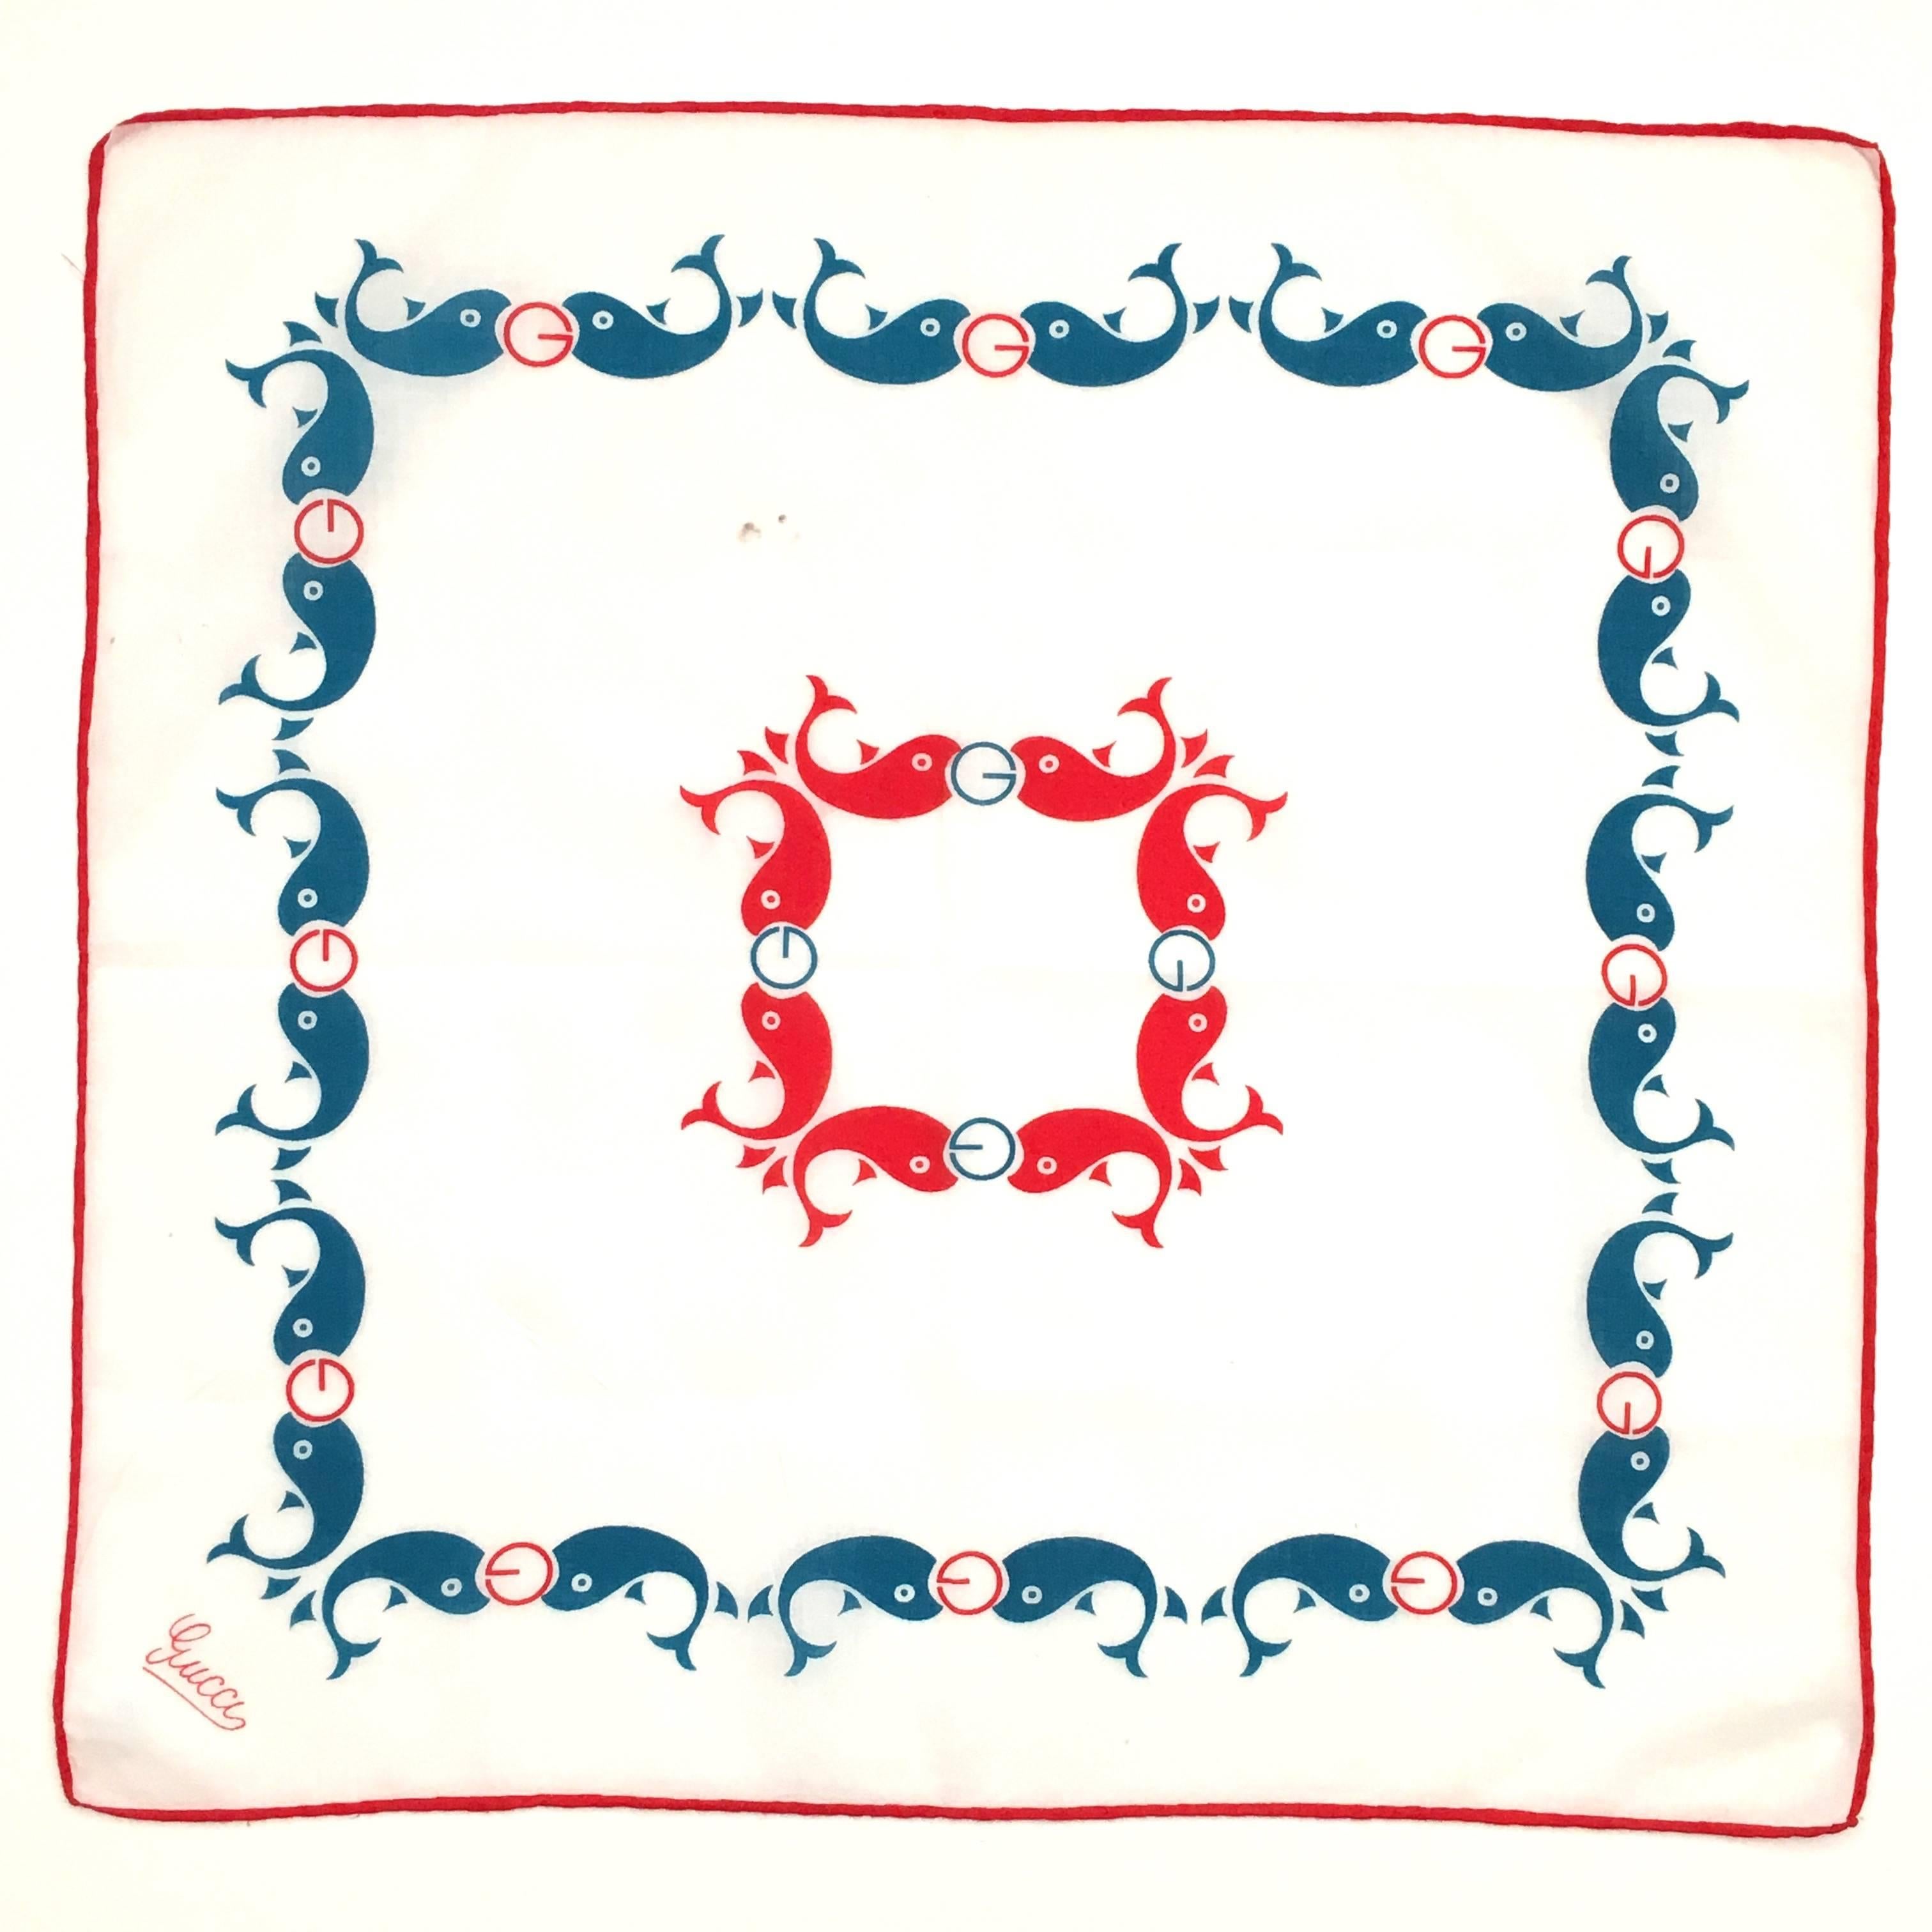 1970s Gucci printed red, white and blue cotton pocket square or small scarf. Printed with red and blue whales holding a Gucci 'G' logo. It is signed with a red 'Gucci' in script in the lower left-hand corner. There is a tag sewn to the back of the